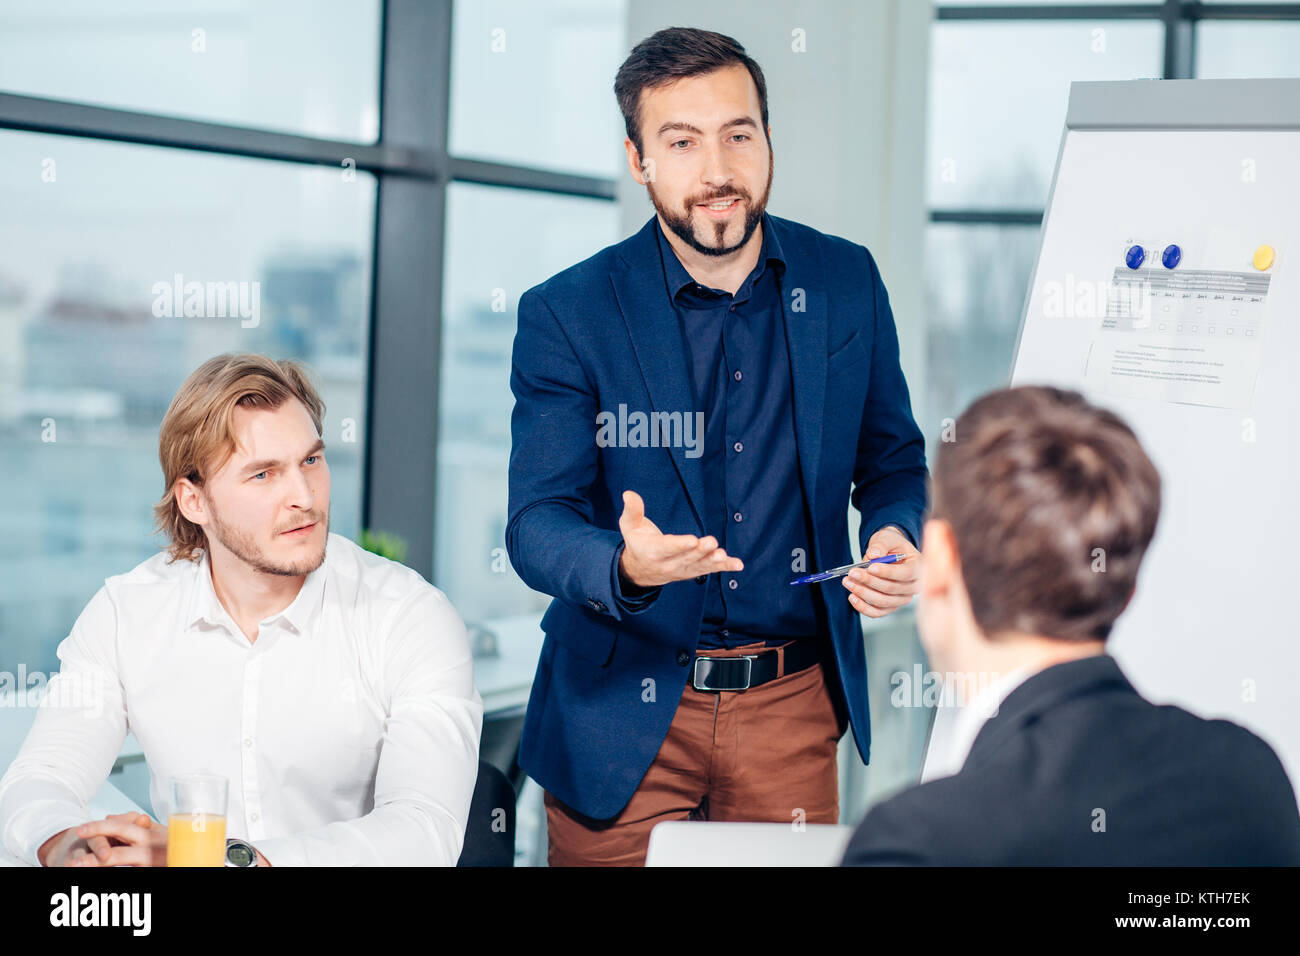 Successful business presentation of man at office Stock Photo